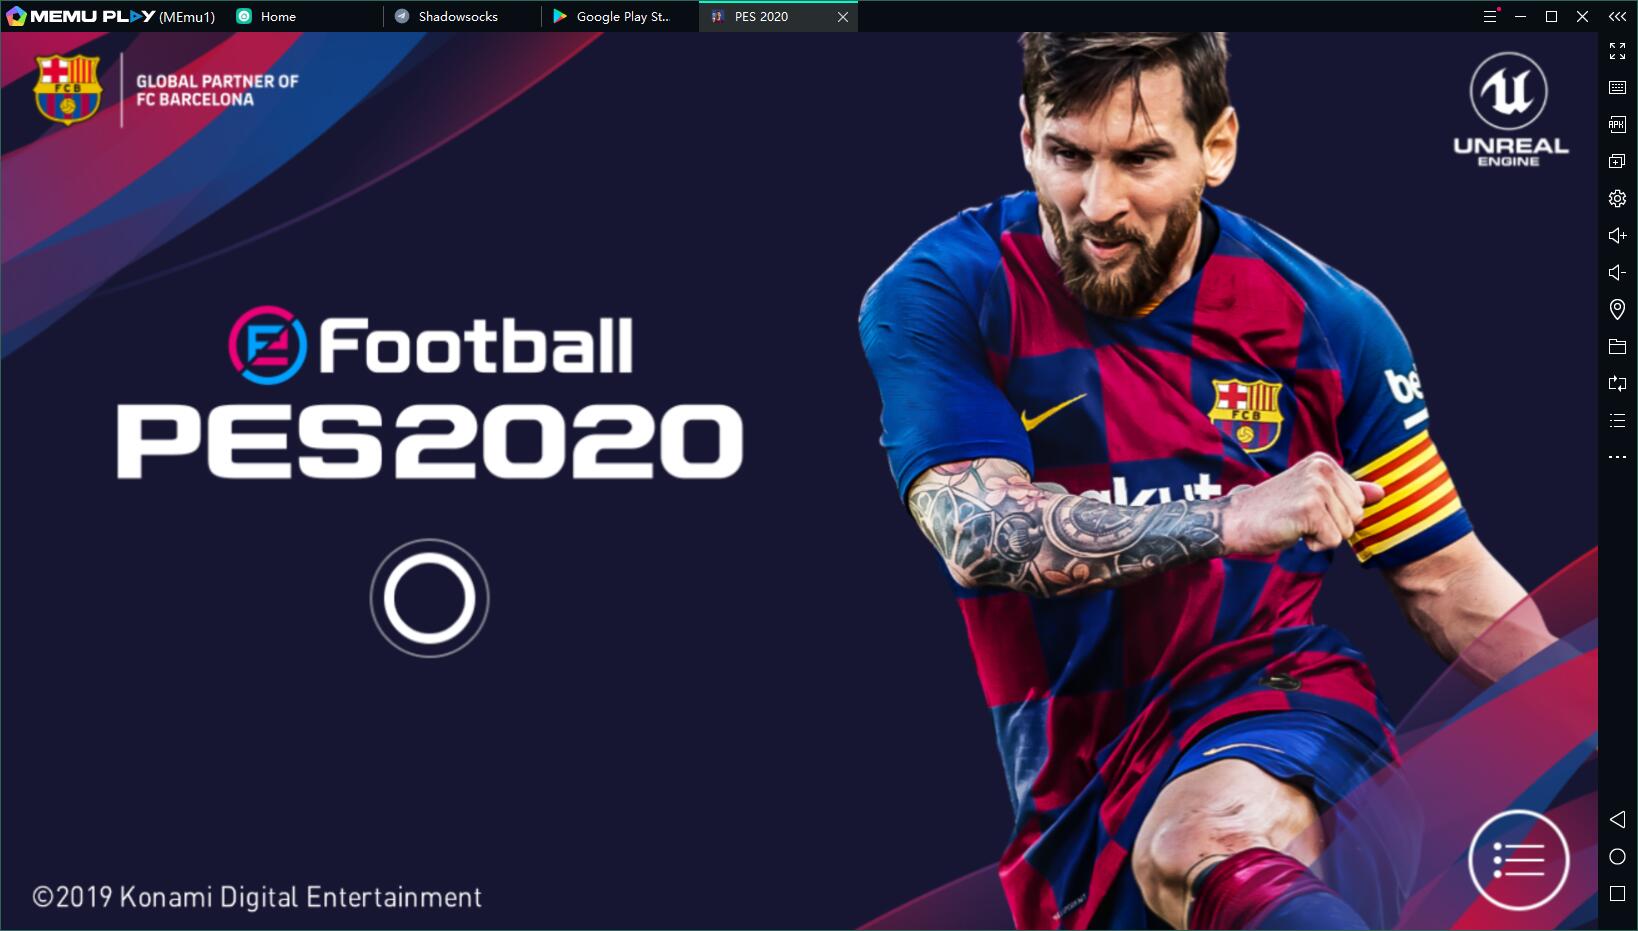 Pes 2020 Cellular Launch Date Pes 2020 New Capabilities Pes